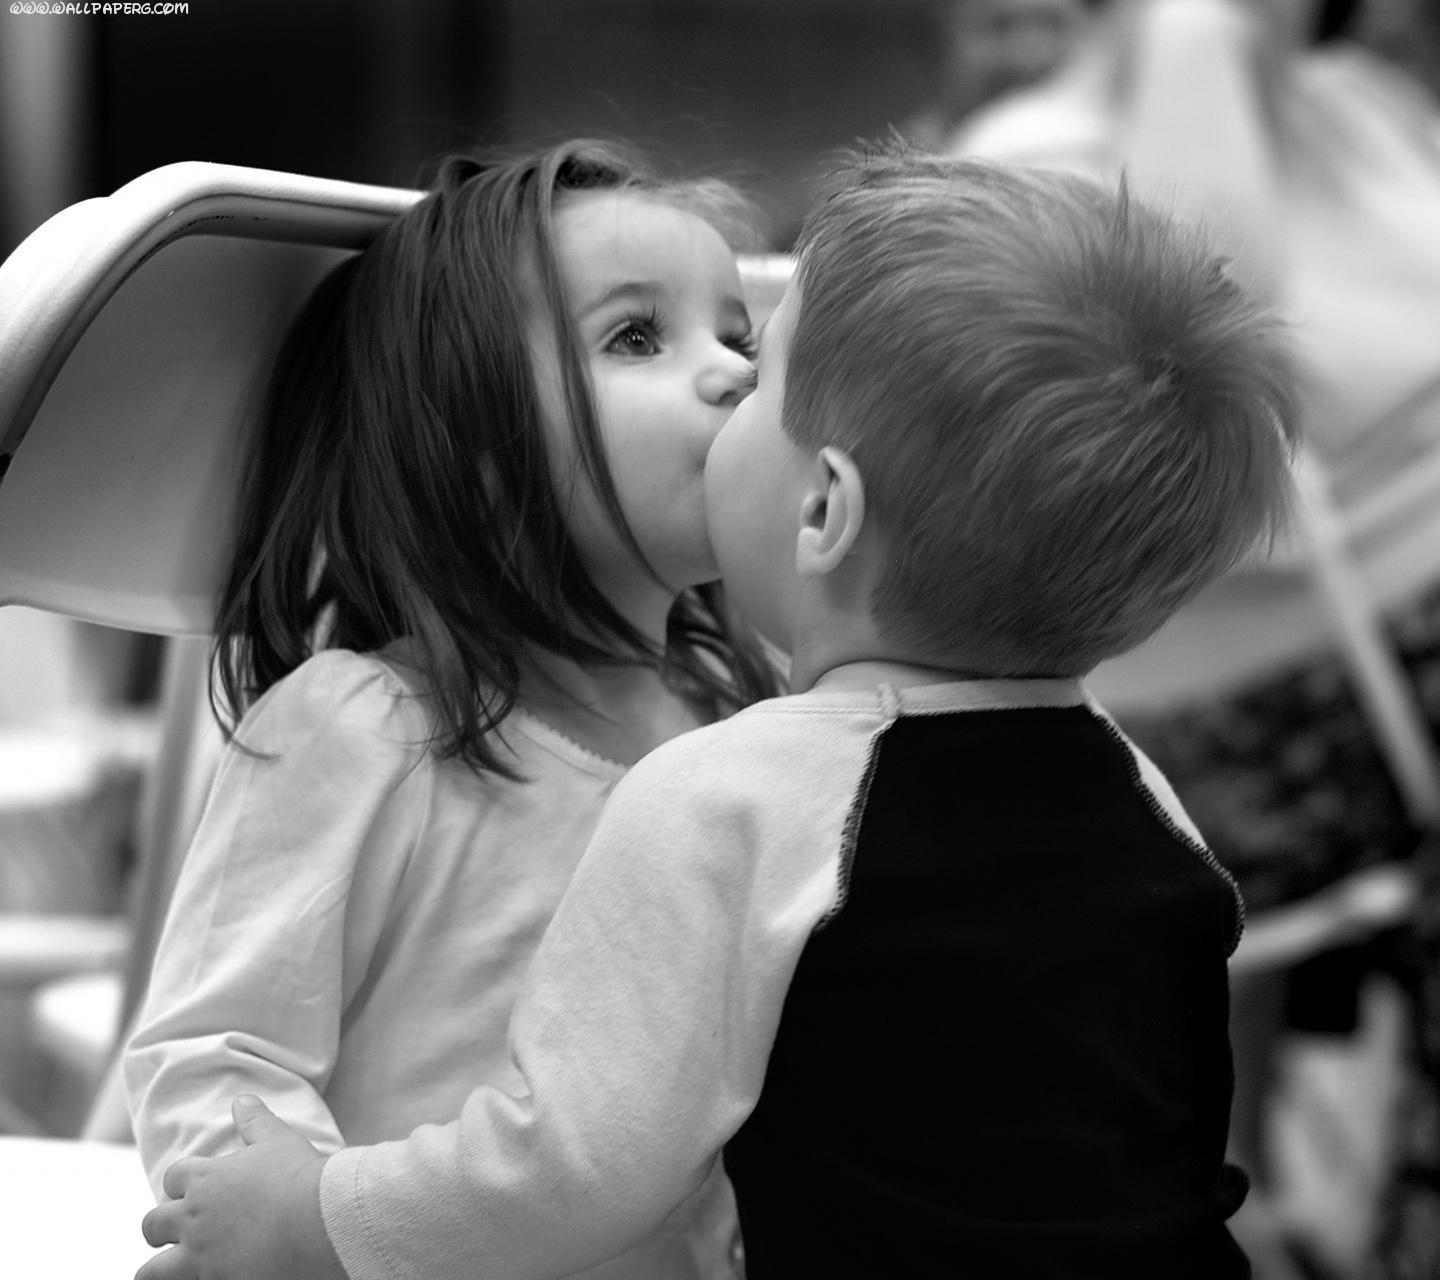 Download Cute kids kissing - Romantic wallpapers for your mobile cell phone